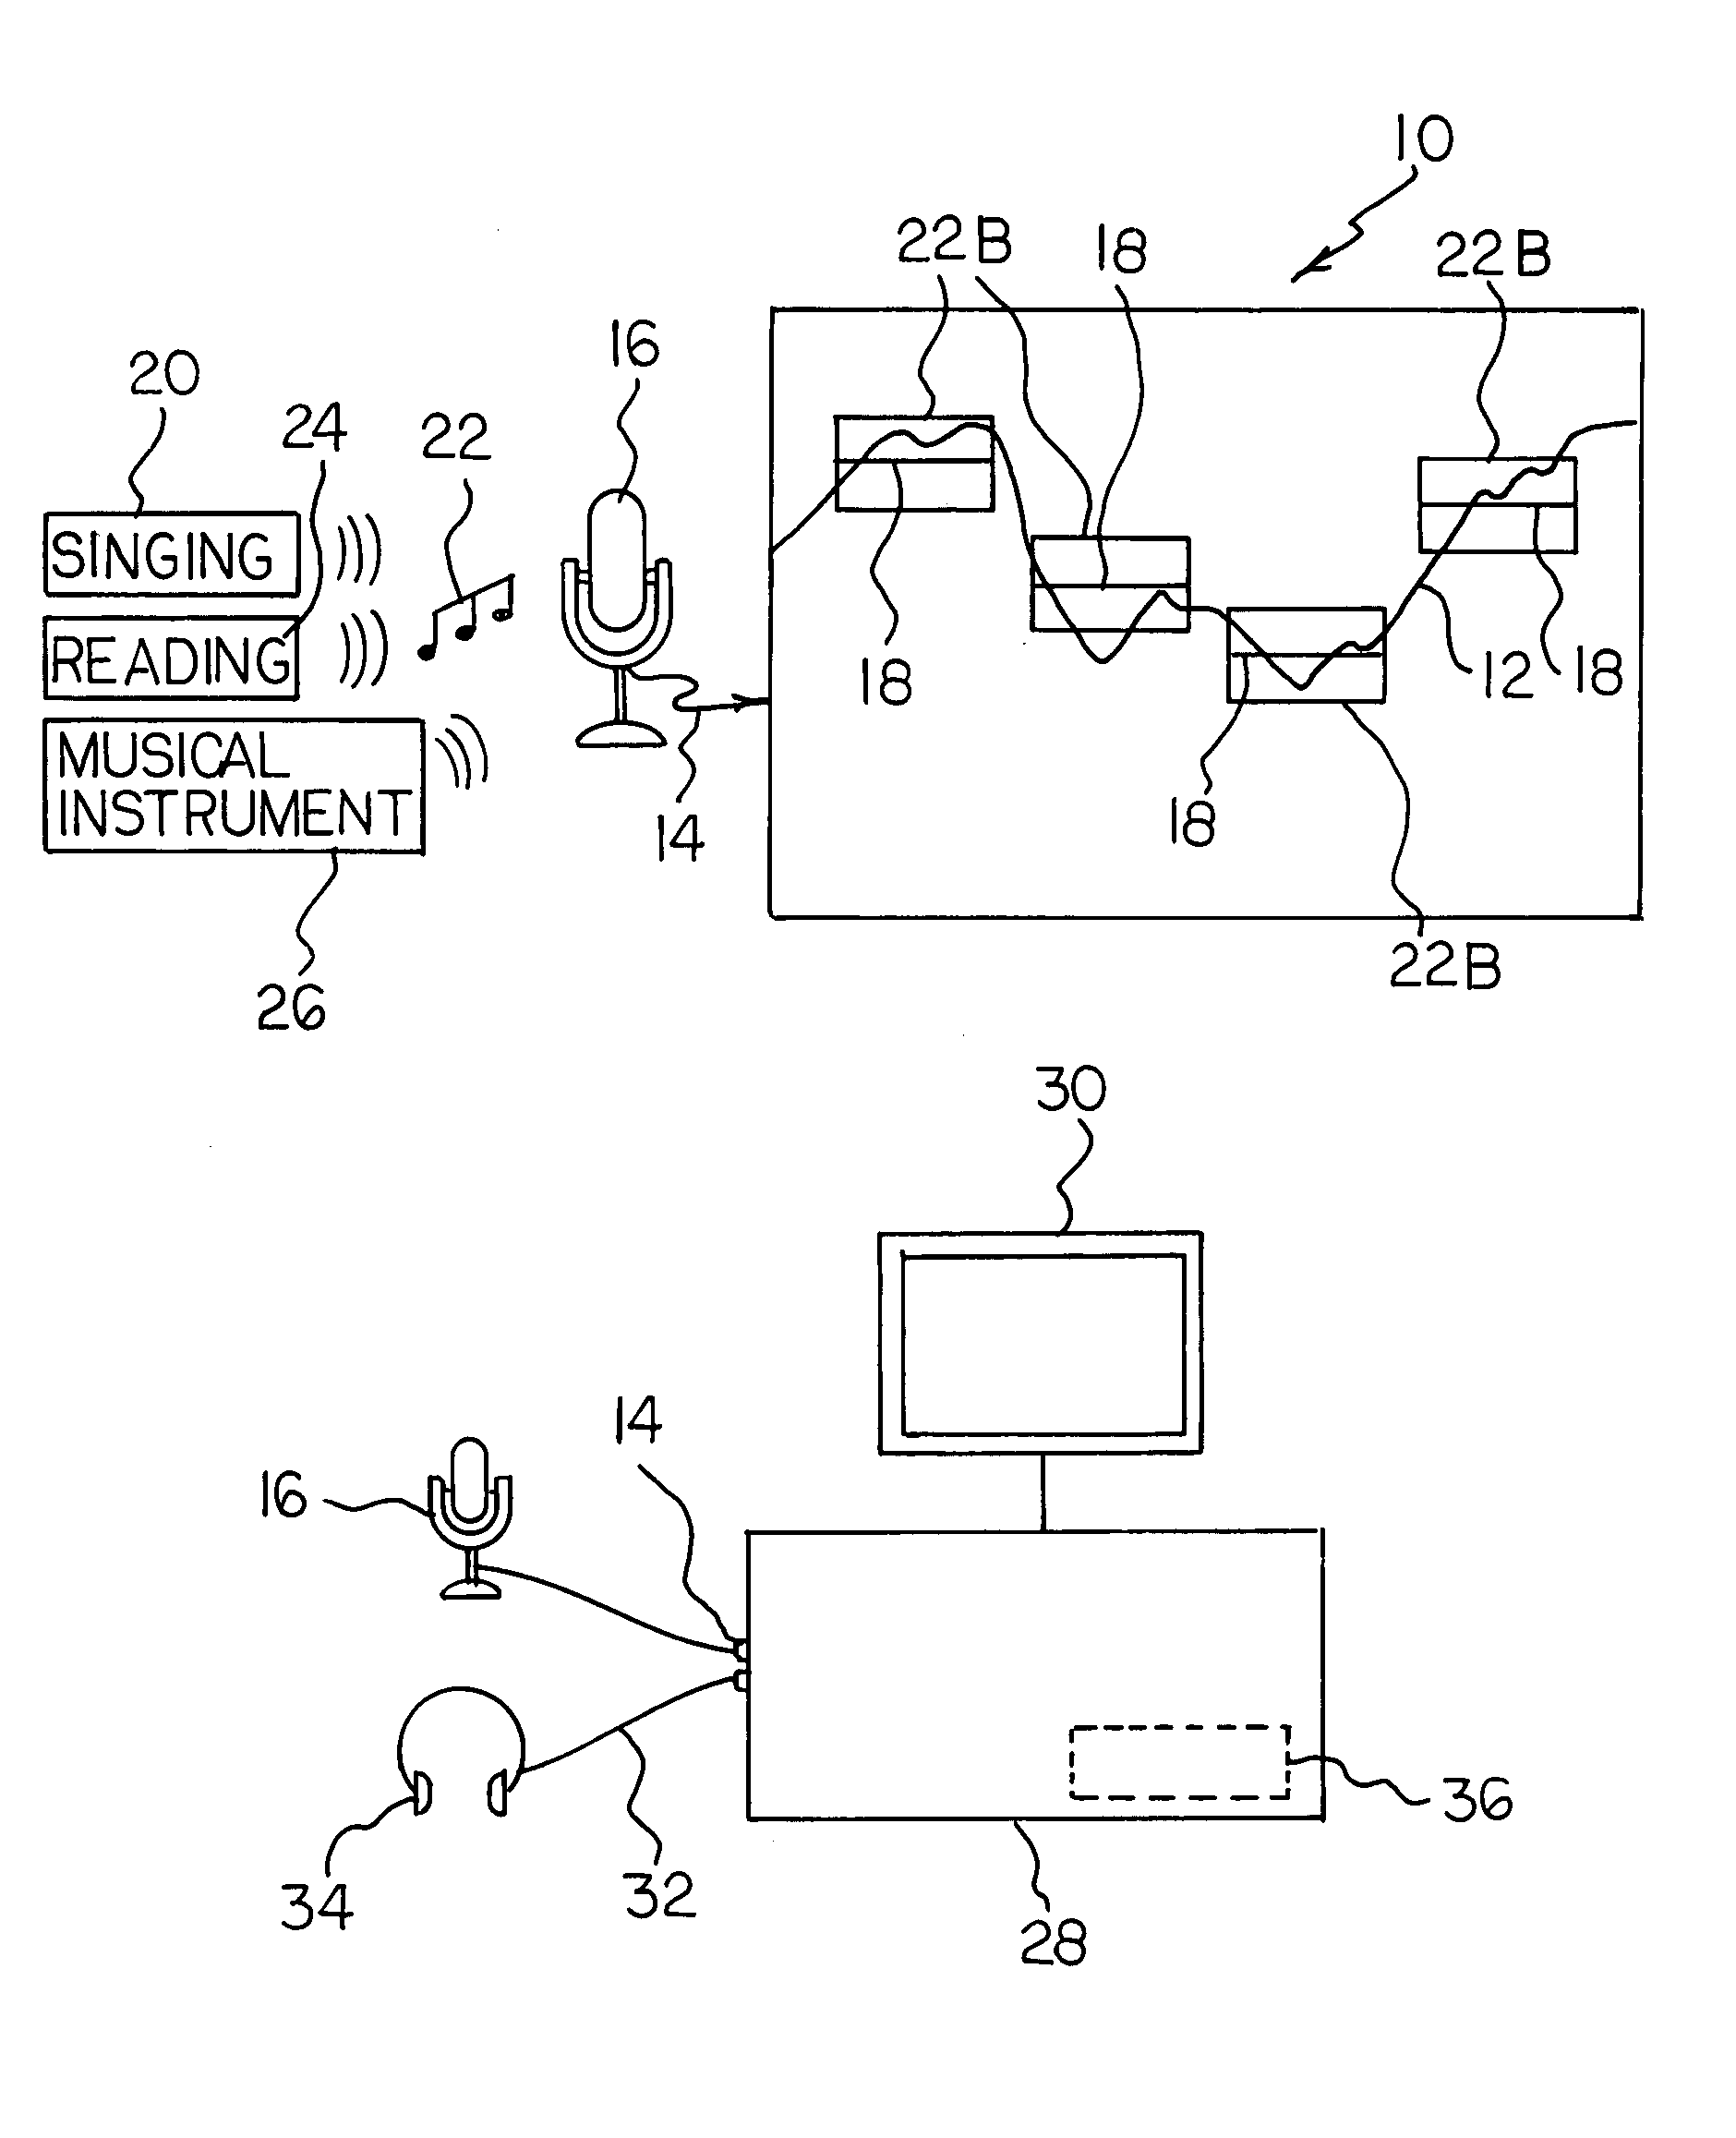 Computer-aided learning system employing a pitch tracking line